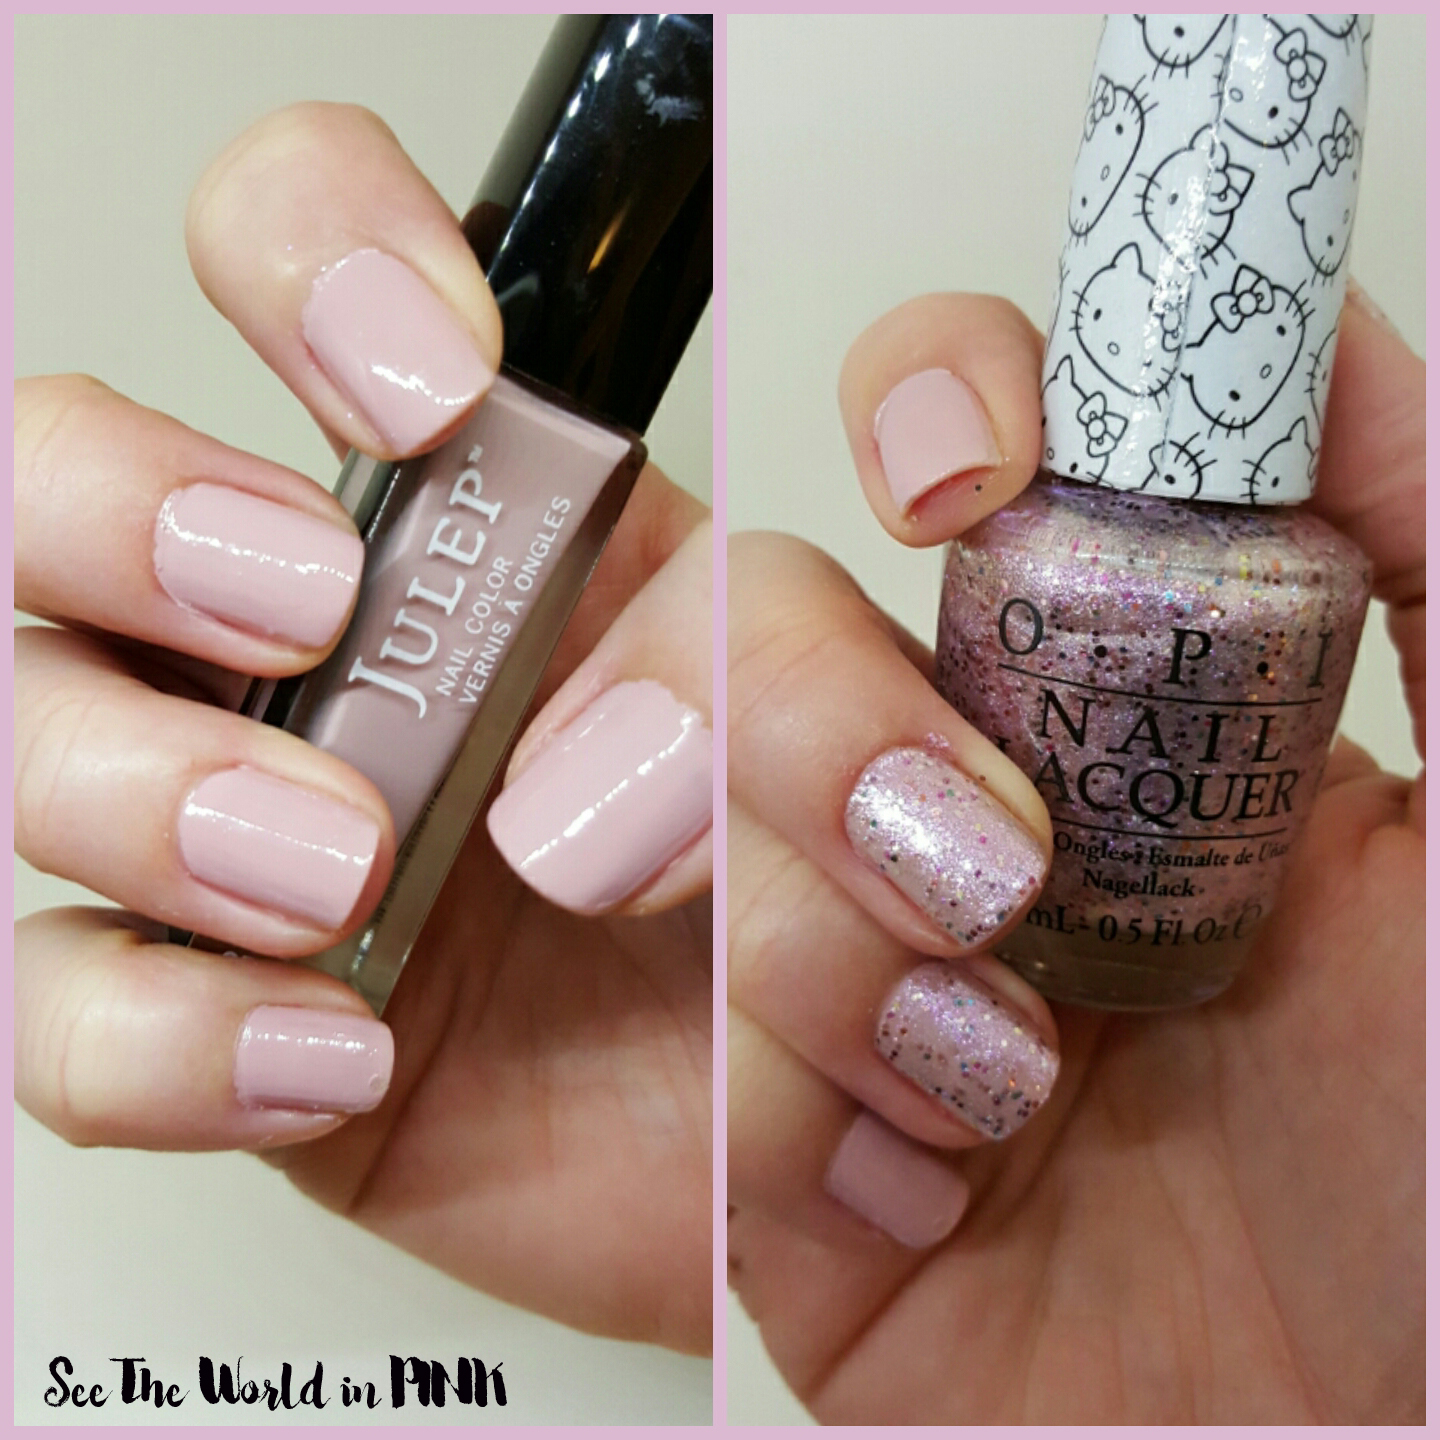 Julep "Helen" and OPI "Charmmy & Sugar" (Hello Kitty Collection)